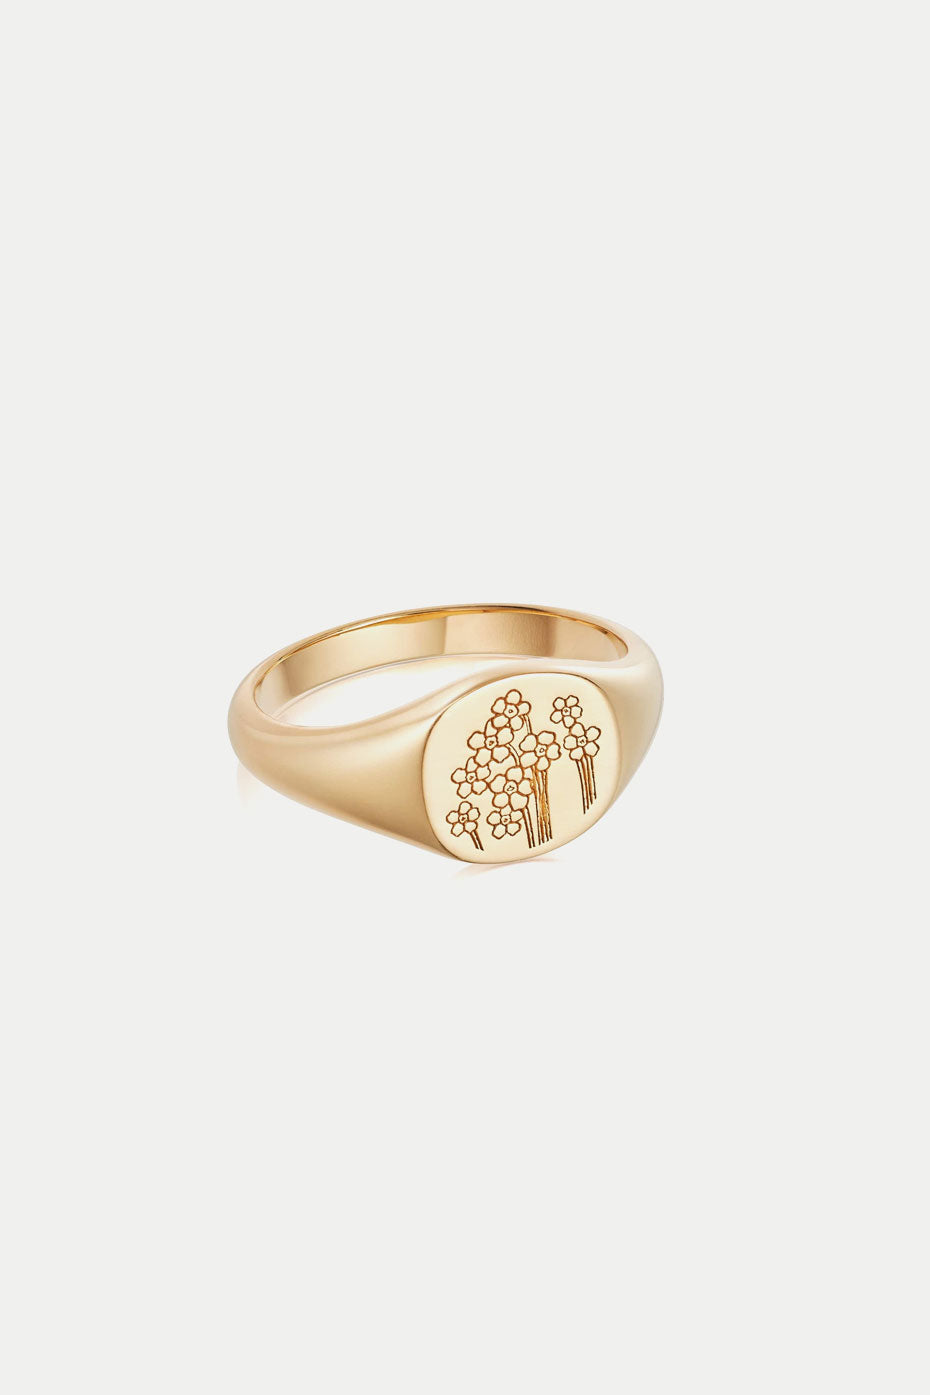 Daisy London Gold Forget Me Not Signet Ring